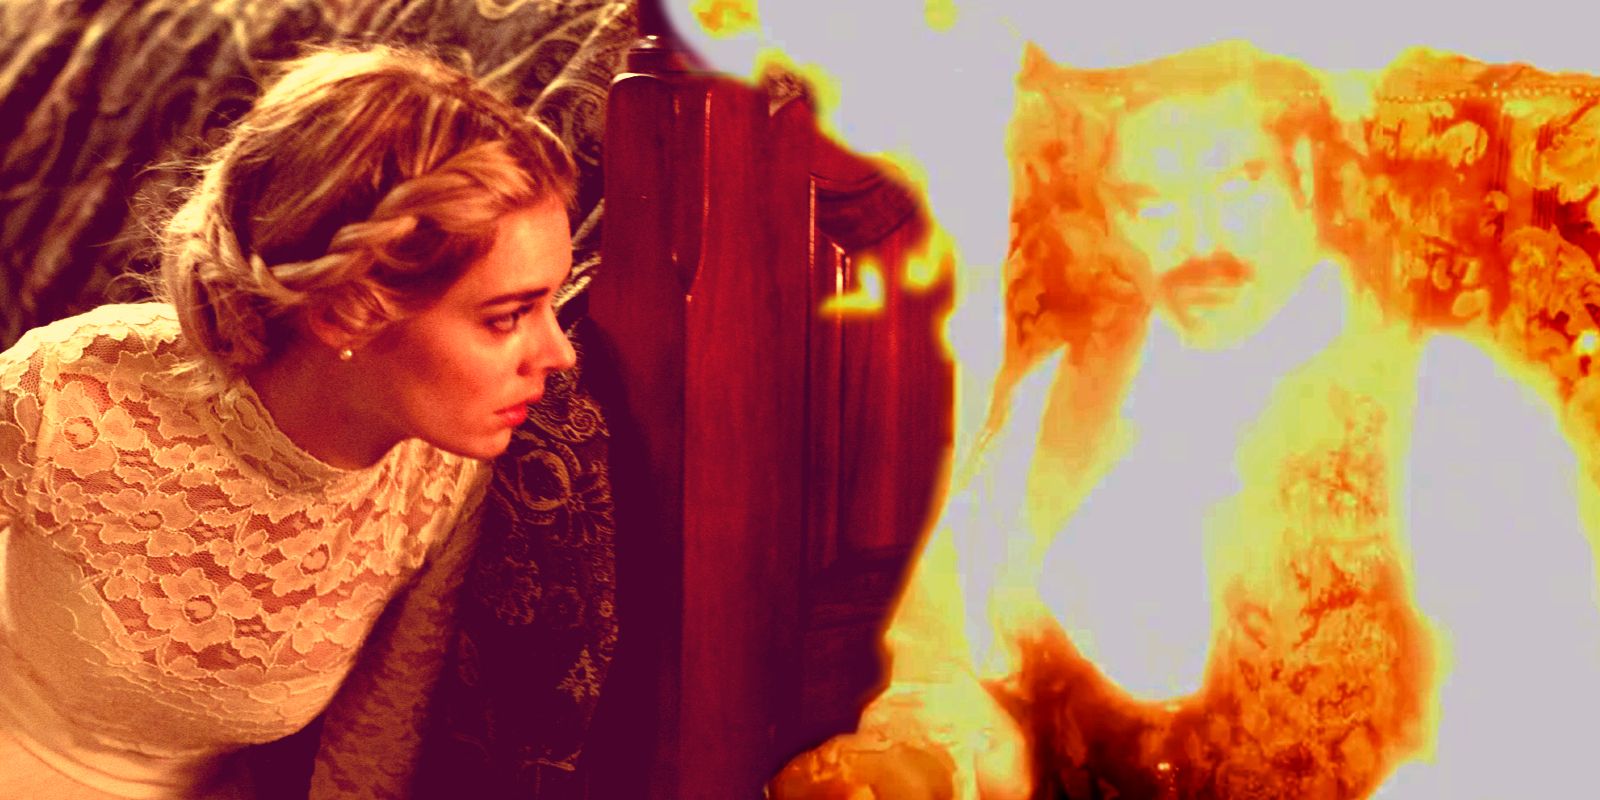 This image shows Grace looking over at a fiery demon.